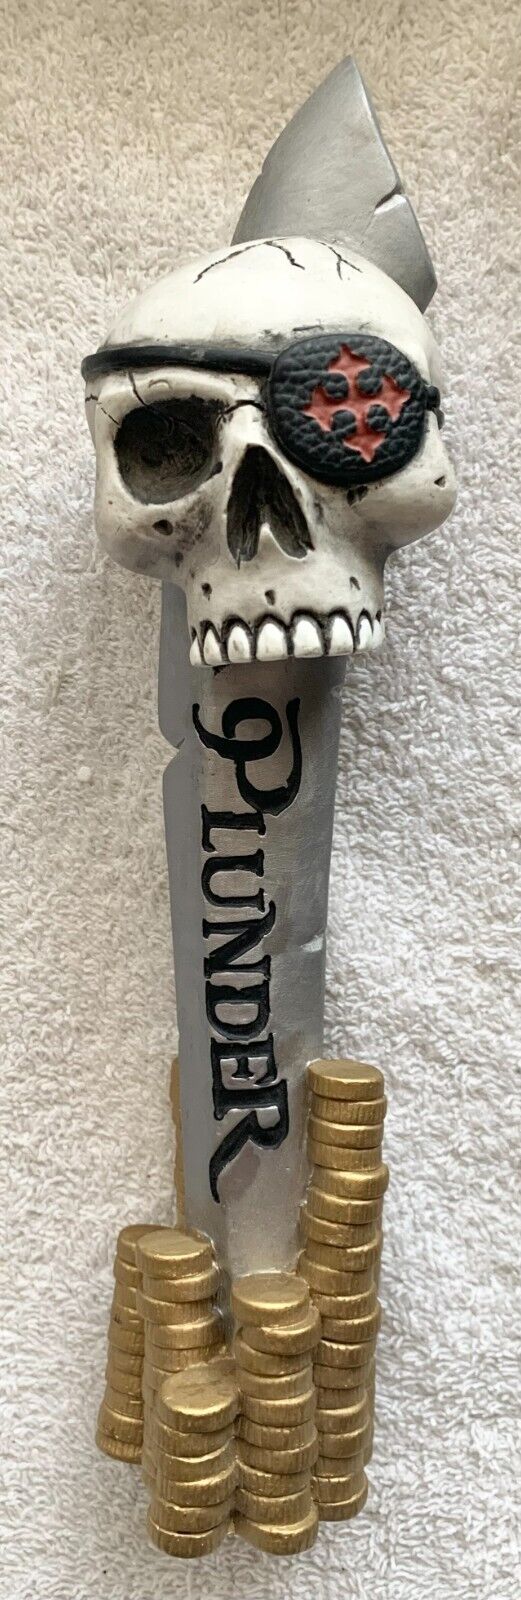 MISSION BREWERY PLUNDER FIGURAL BEER TAP HANDLE RARE PIRATE SKULL TREASURE COINS